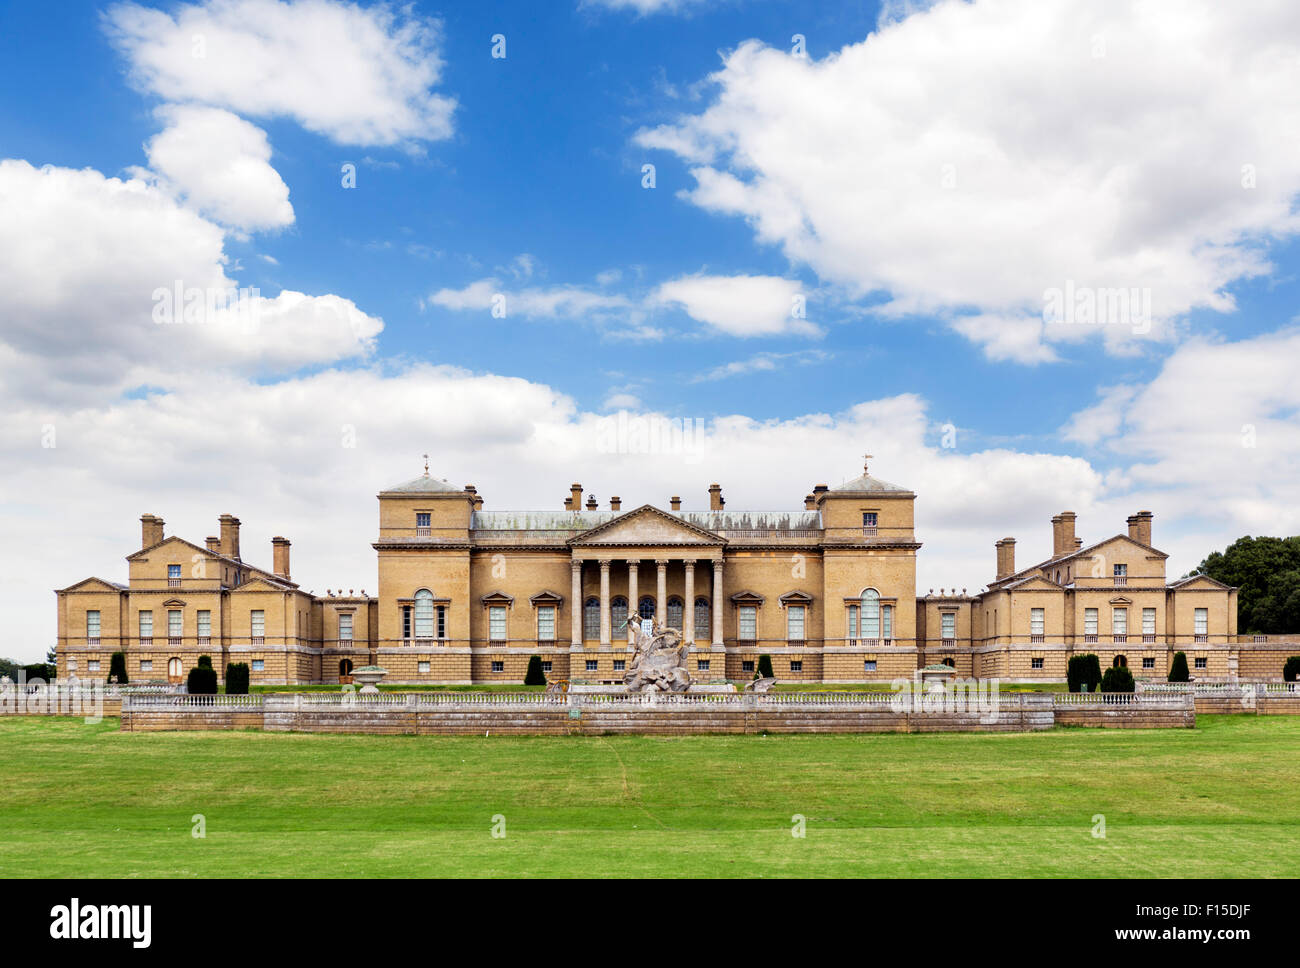 Holkham Hall, an early 18thC Palladian country house in Holkham, Norfolk, England, UK Stock Photo